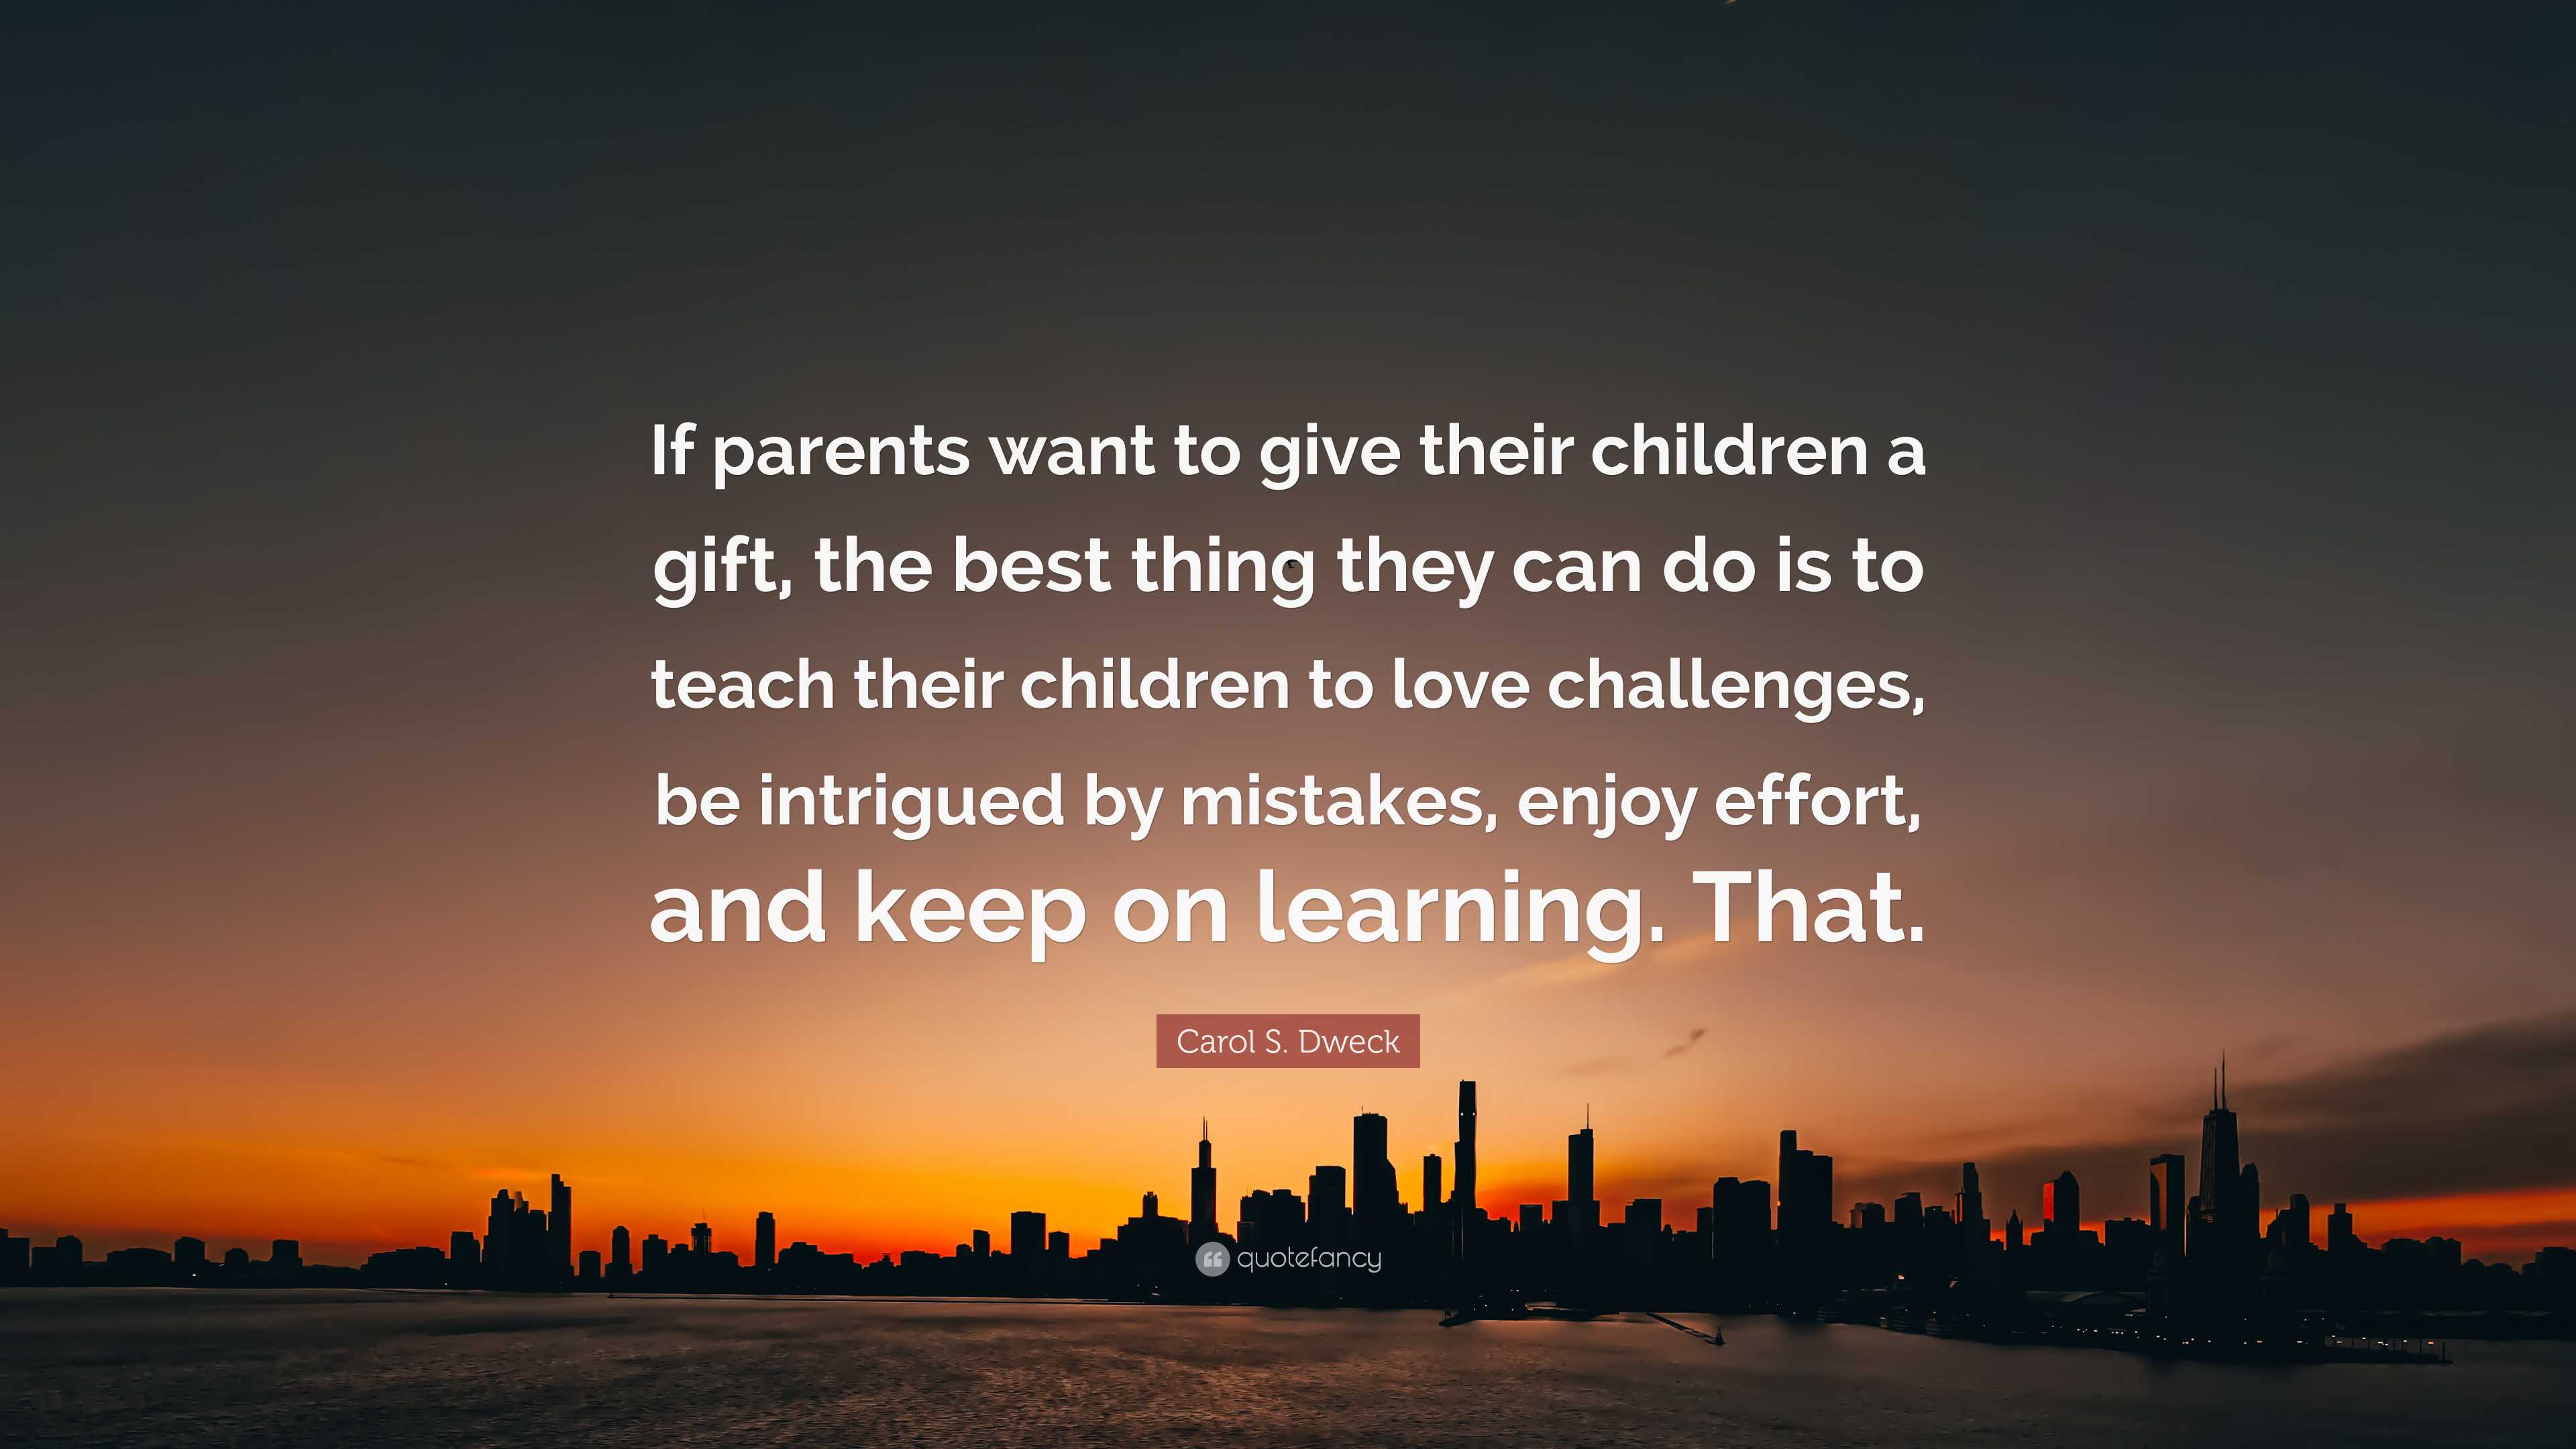 Carol S. Dweck Quote: “If parents want to give their children a gift, the  best thing they can do is to teach their children to love challenges,”